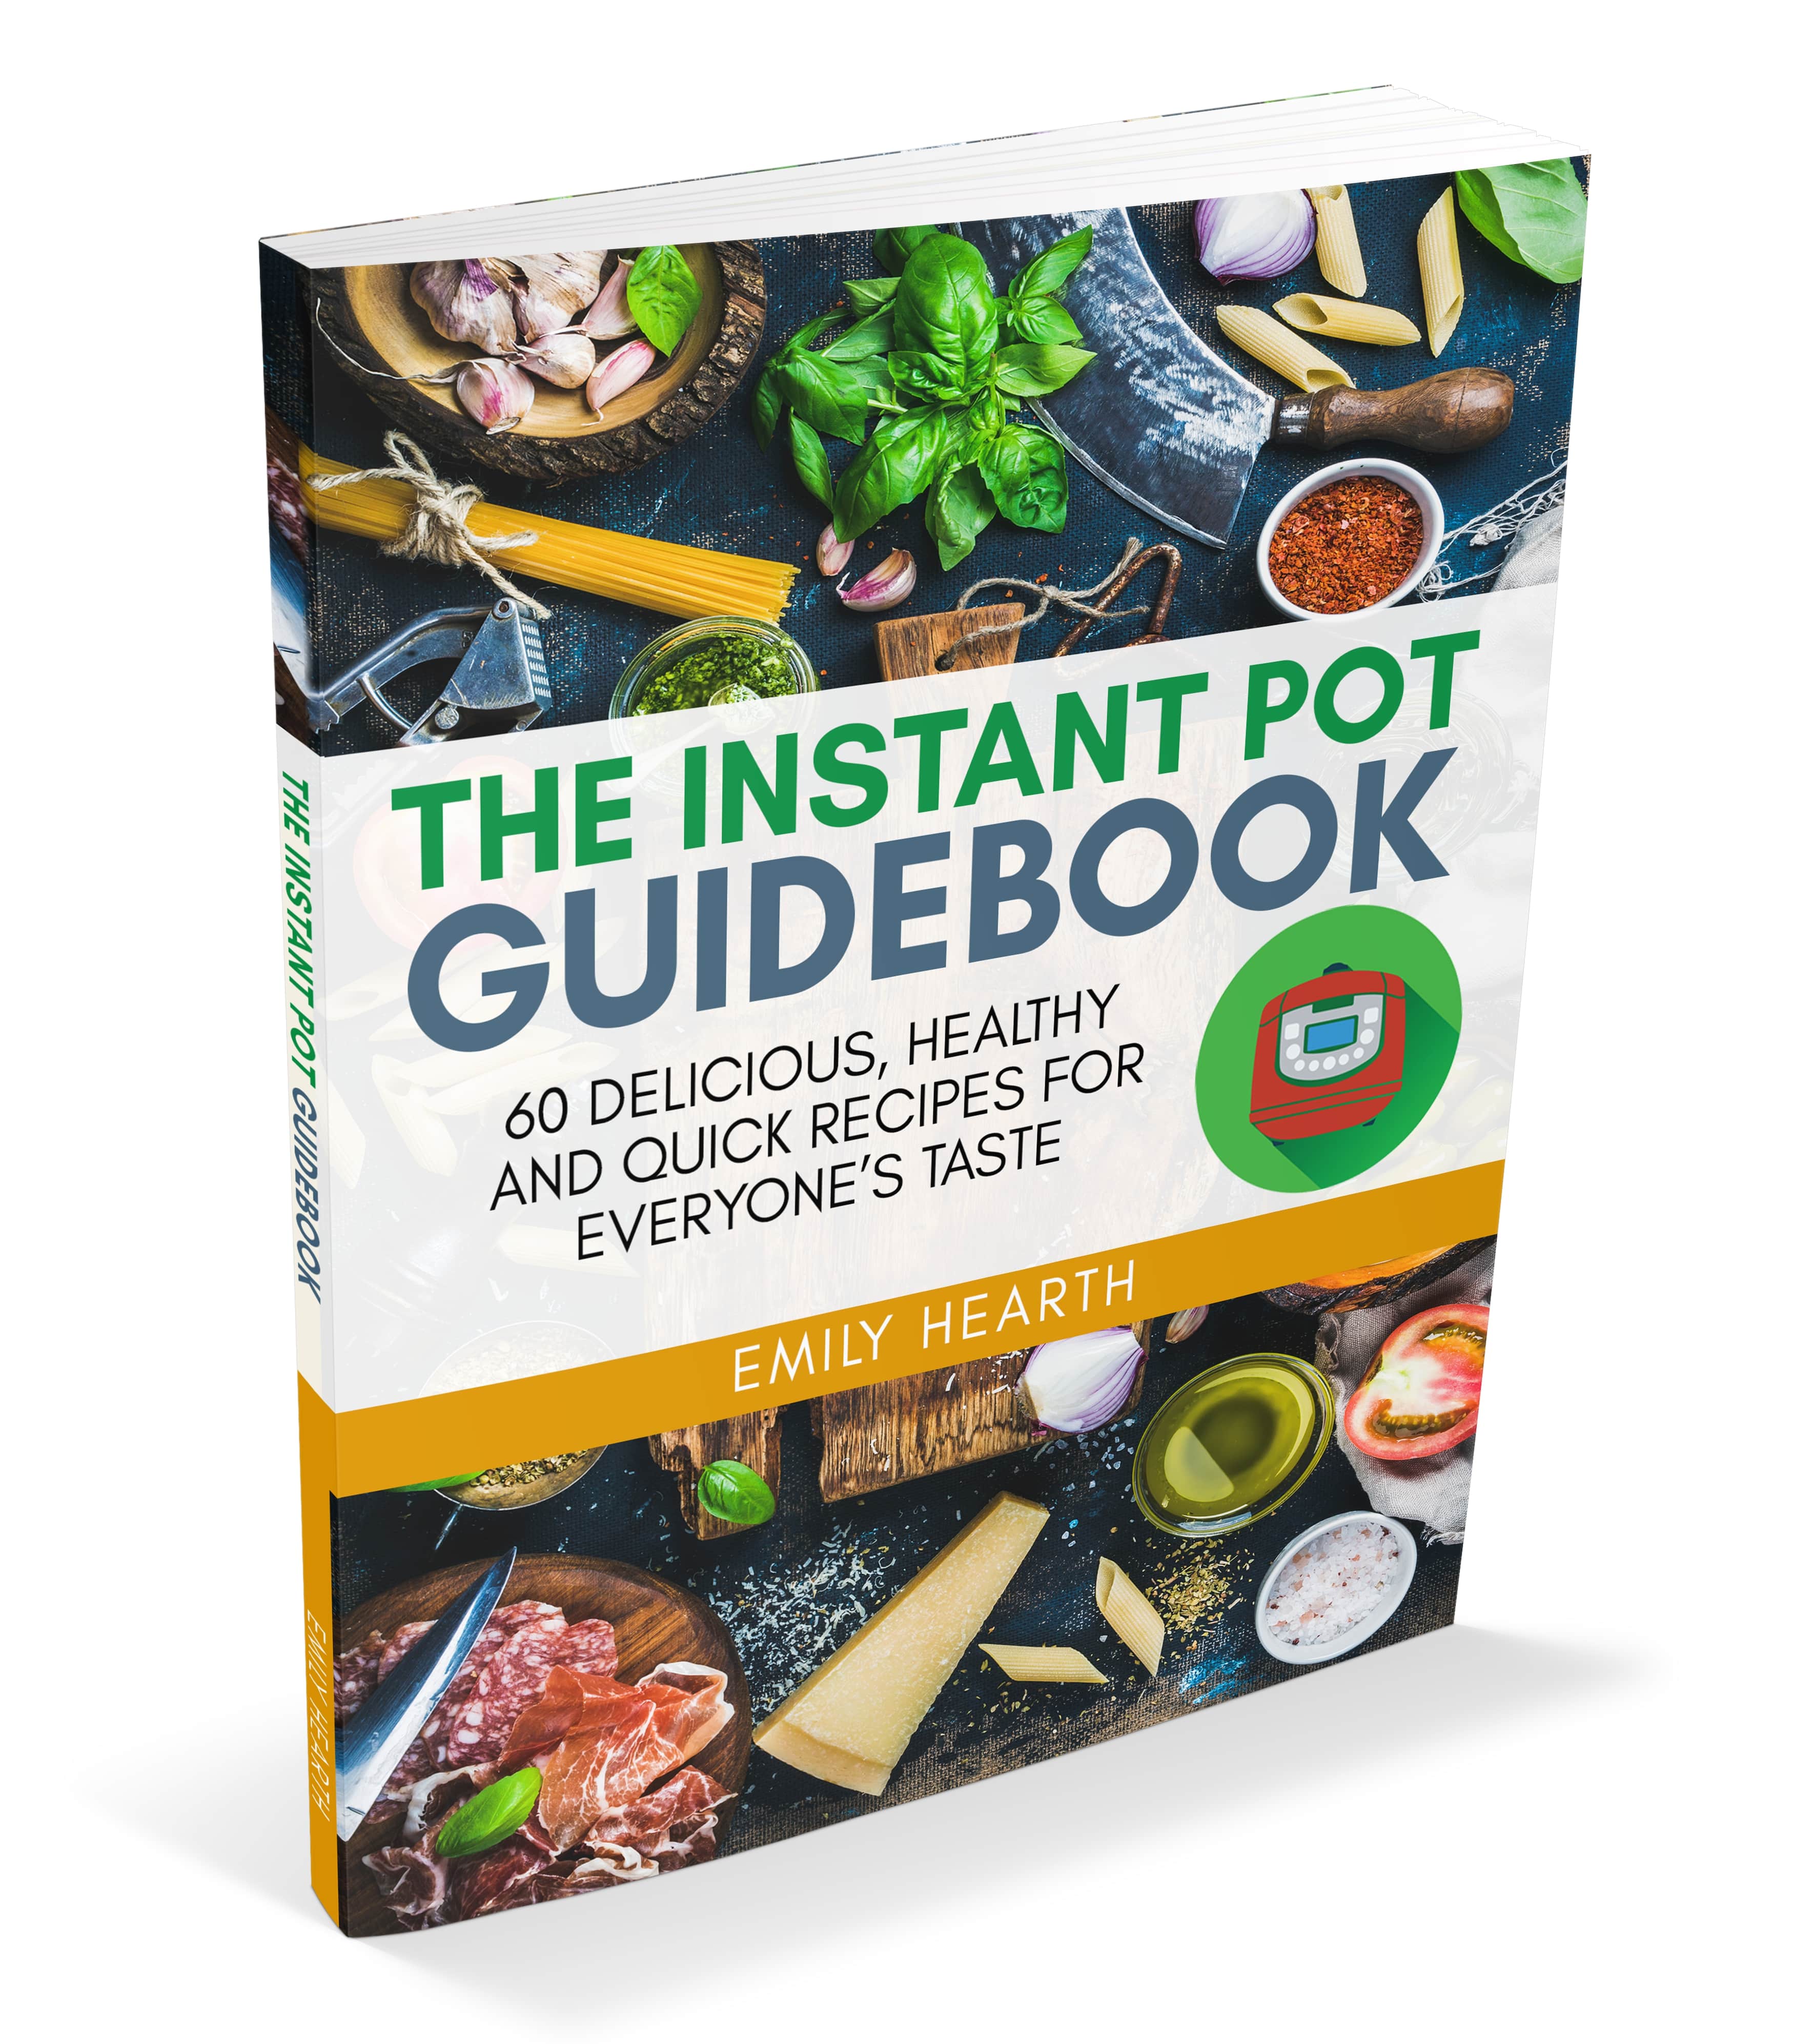 FREE: The Instant Pot Guidebook: 60 Delicious, Healthy and Quick Recipes for Everyone’s Taste by Emily Hearth